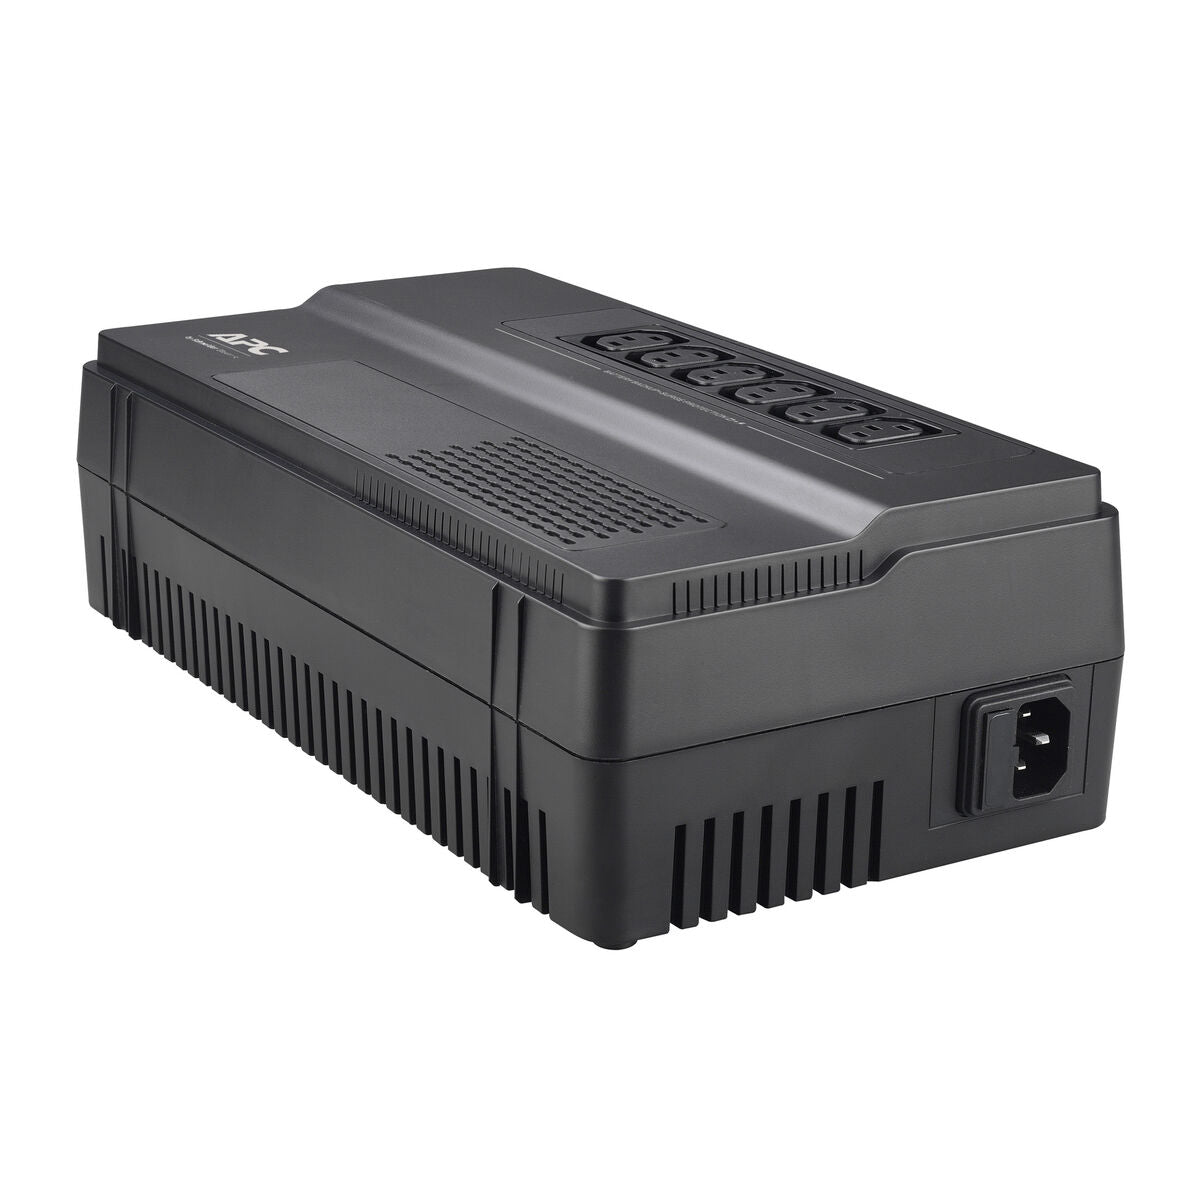 Uninterruptible Power Supply System Interactive UPS APC BV500I, APC, Computing, Accessories, uninterruptible-power-supply-system-interactive-ups-apc-bv500i, Brand_APC, category-reference-2609, category-reference-2642, category-reference-2845, category-reference-t-19685, category-reference-t-19908, category-reference-t-21341, computers / peripherals, Condition_NEW, office, Price_100 - 200, Teleworking, RiotNook